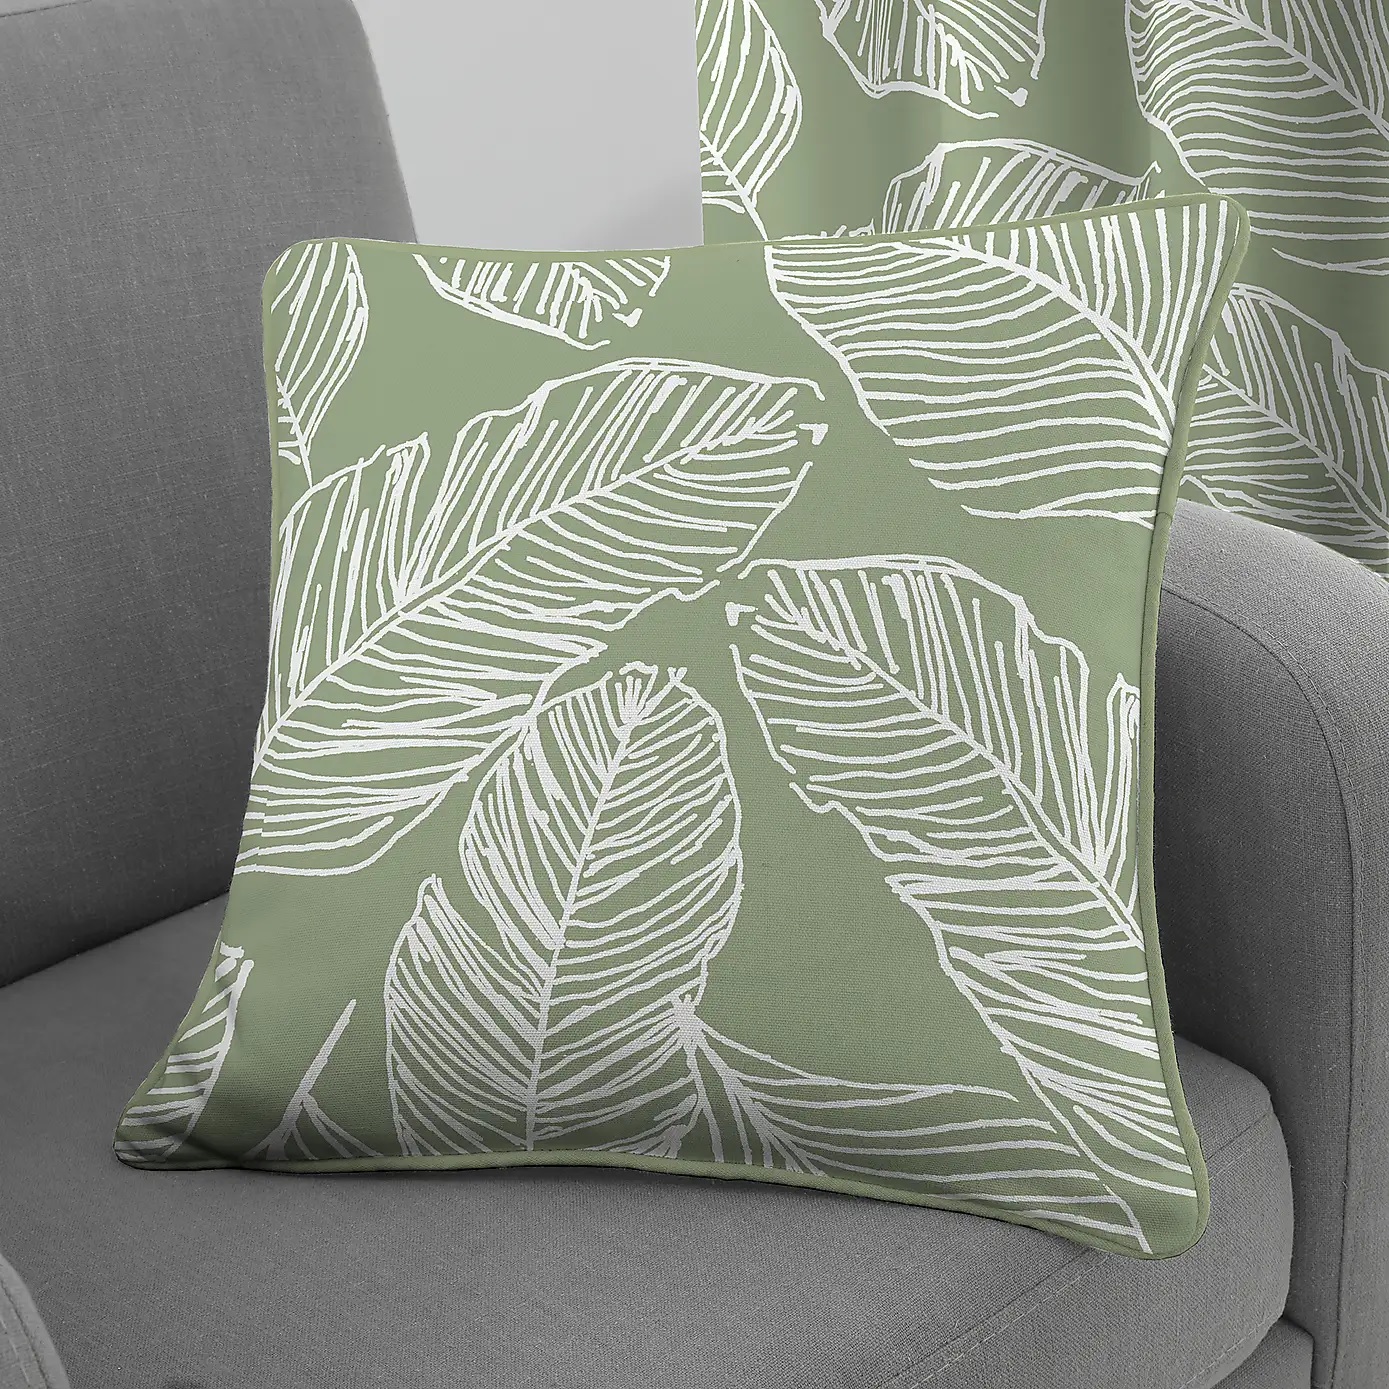 But Dunelm’s fusion matteo cushion is just £10